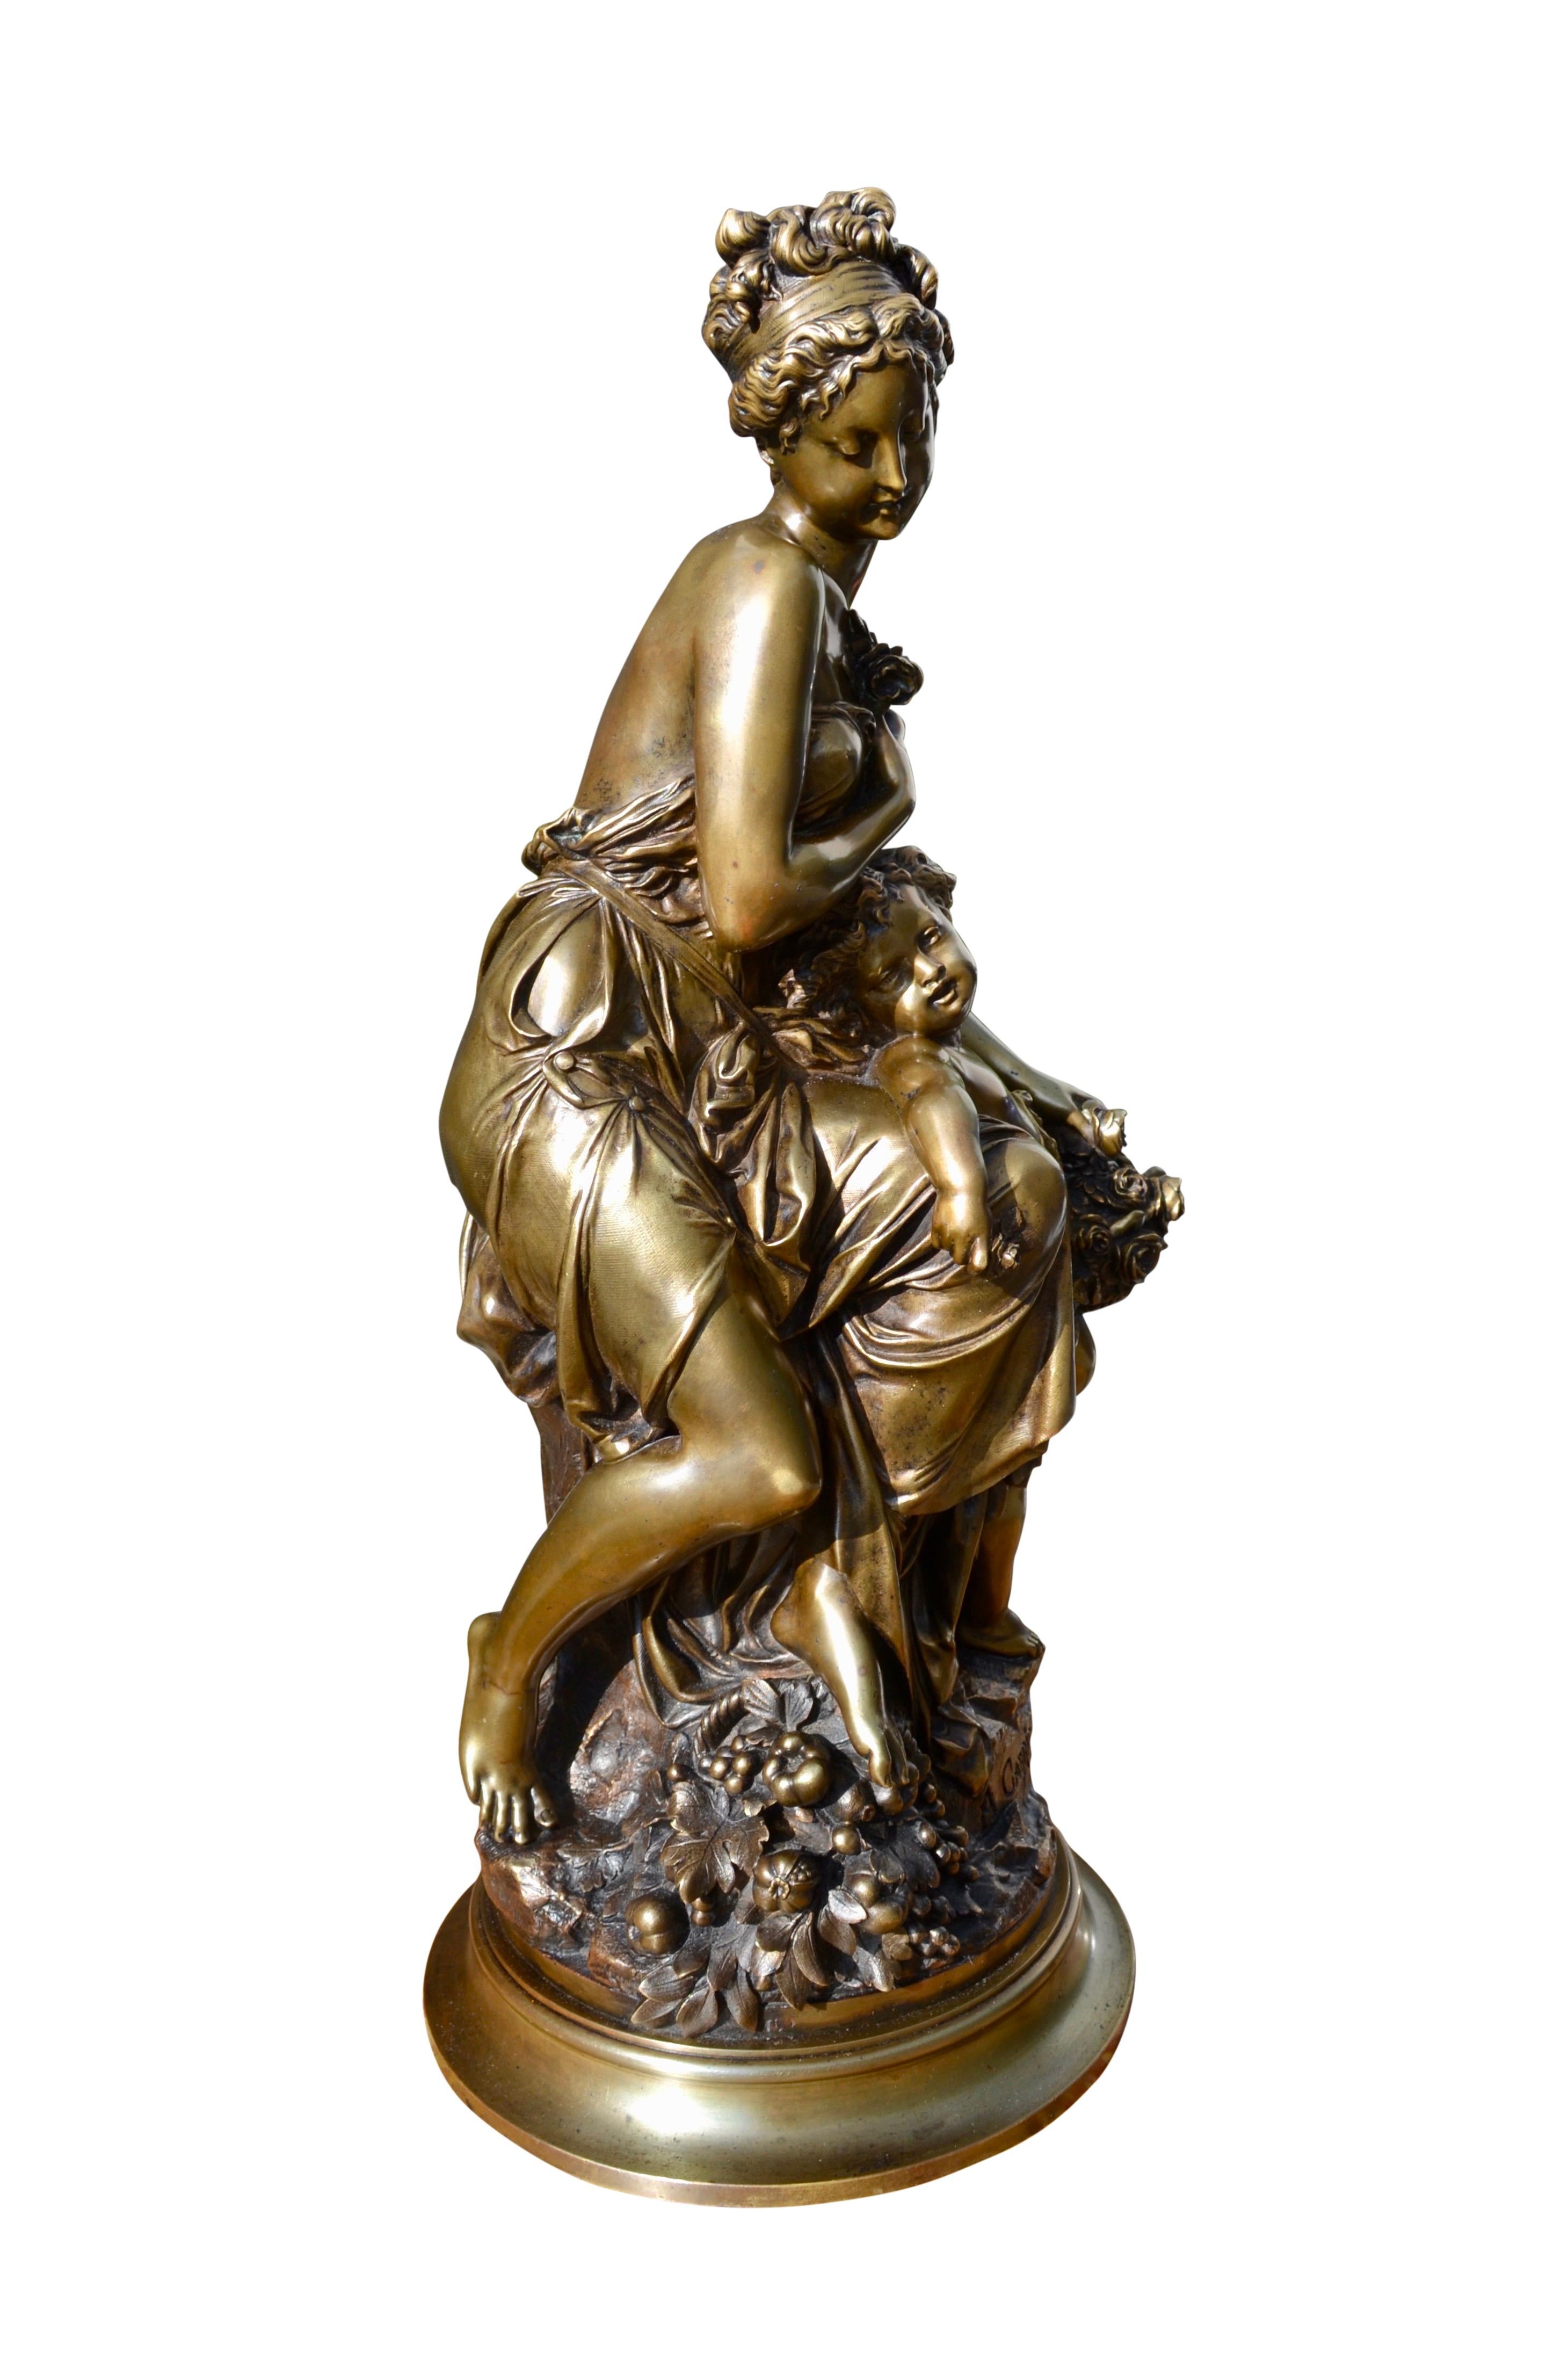 Romantic  A 19 Century French  Gilt bronze Statue of Venus and Cupid  signed A. Carrier 